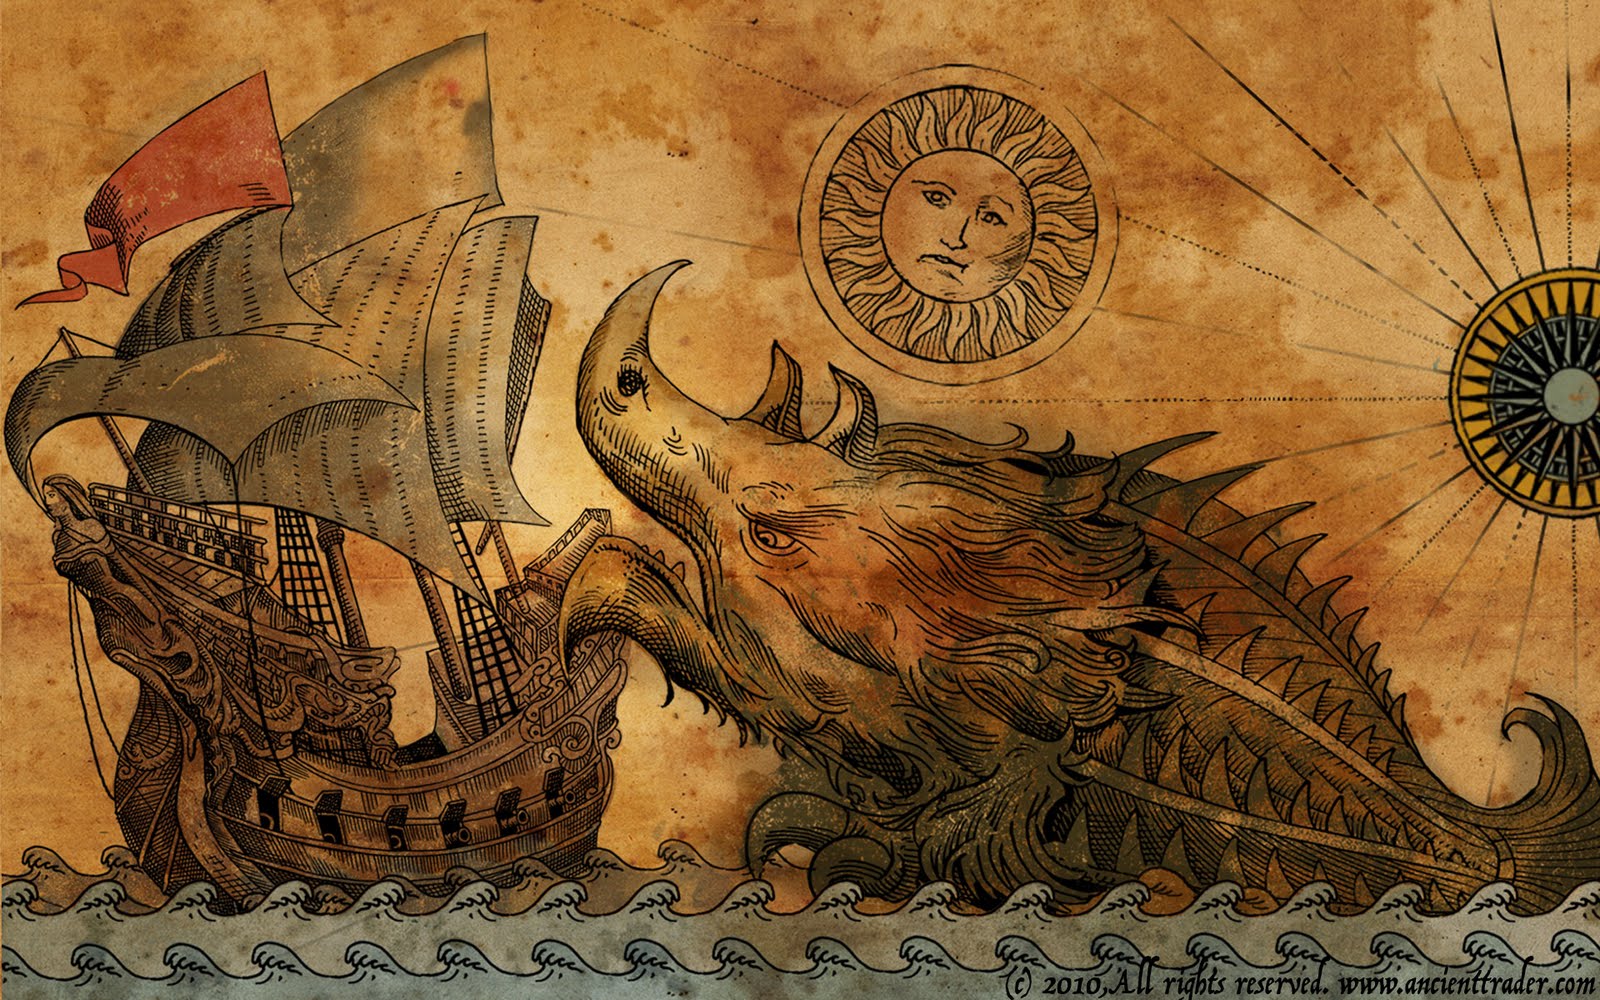 Awesome Background Wallpaper Leviathan FHDq